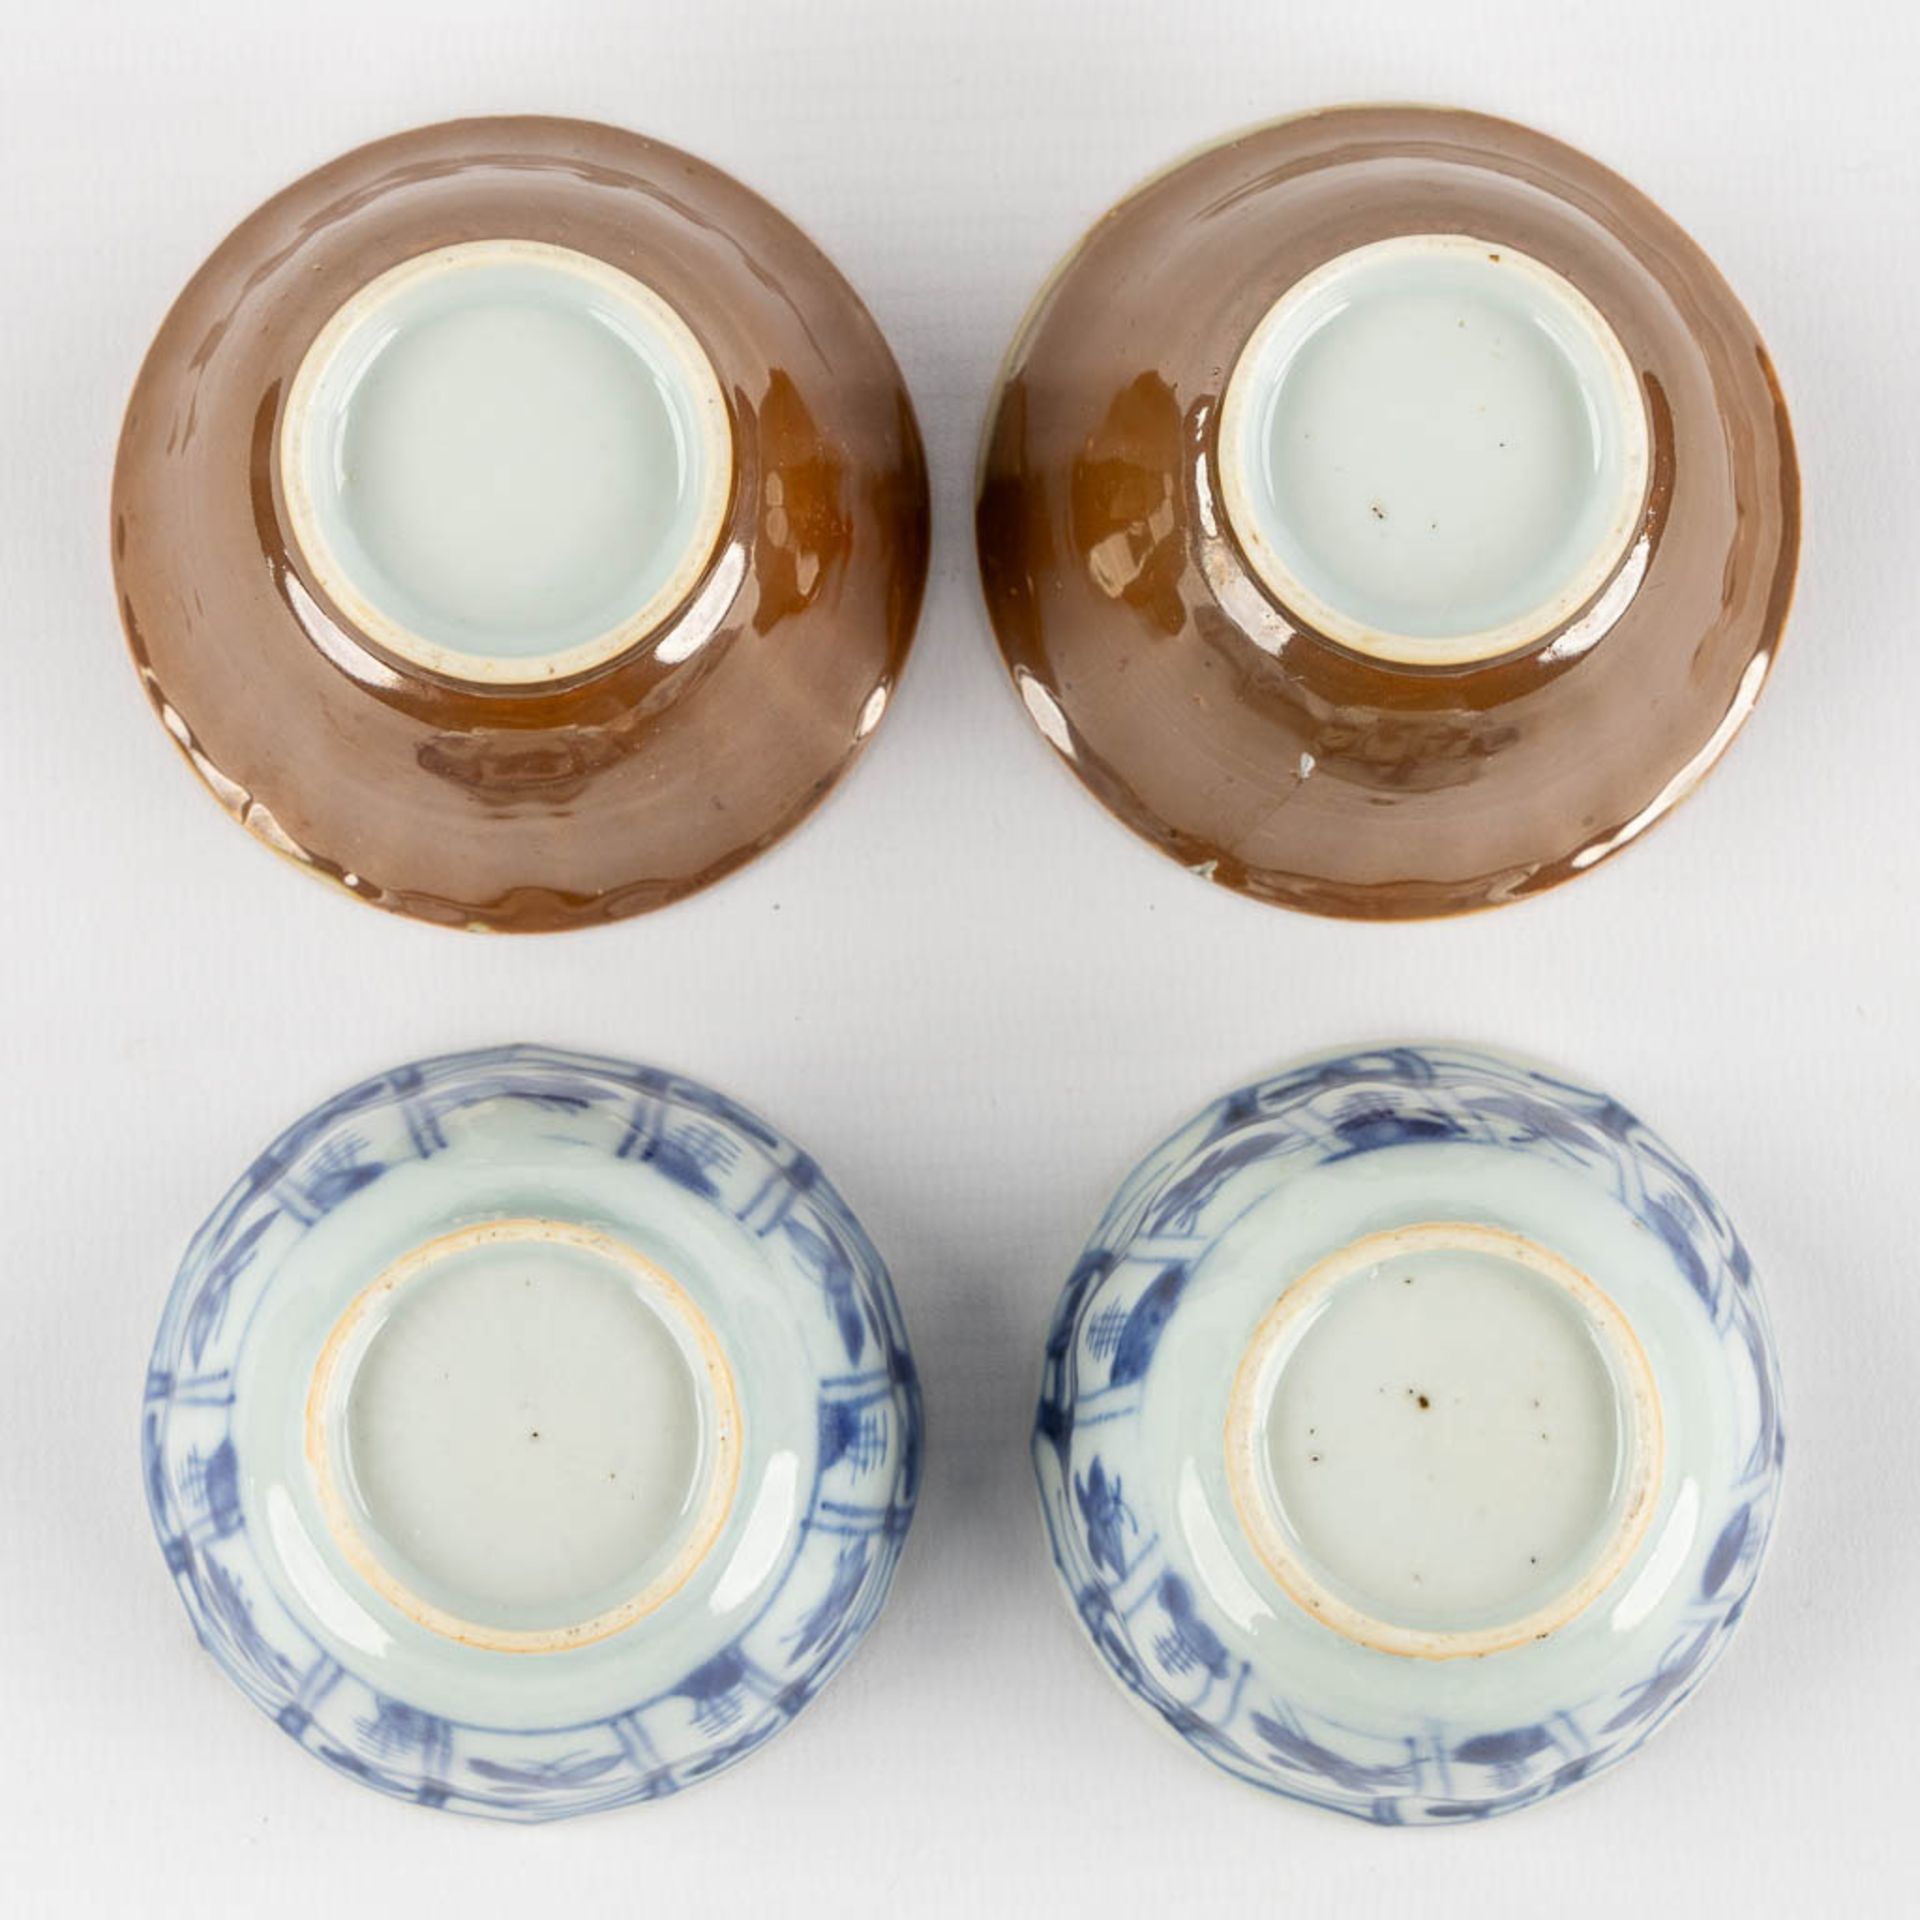 Fifteen Chinese cups, saucers and plates, blue white and Famille Roze. (D:23,4 cm) - Bild 14 aus 15